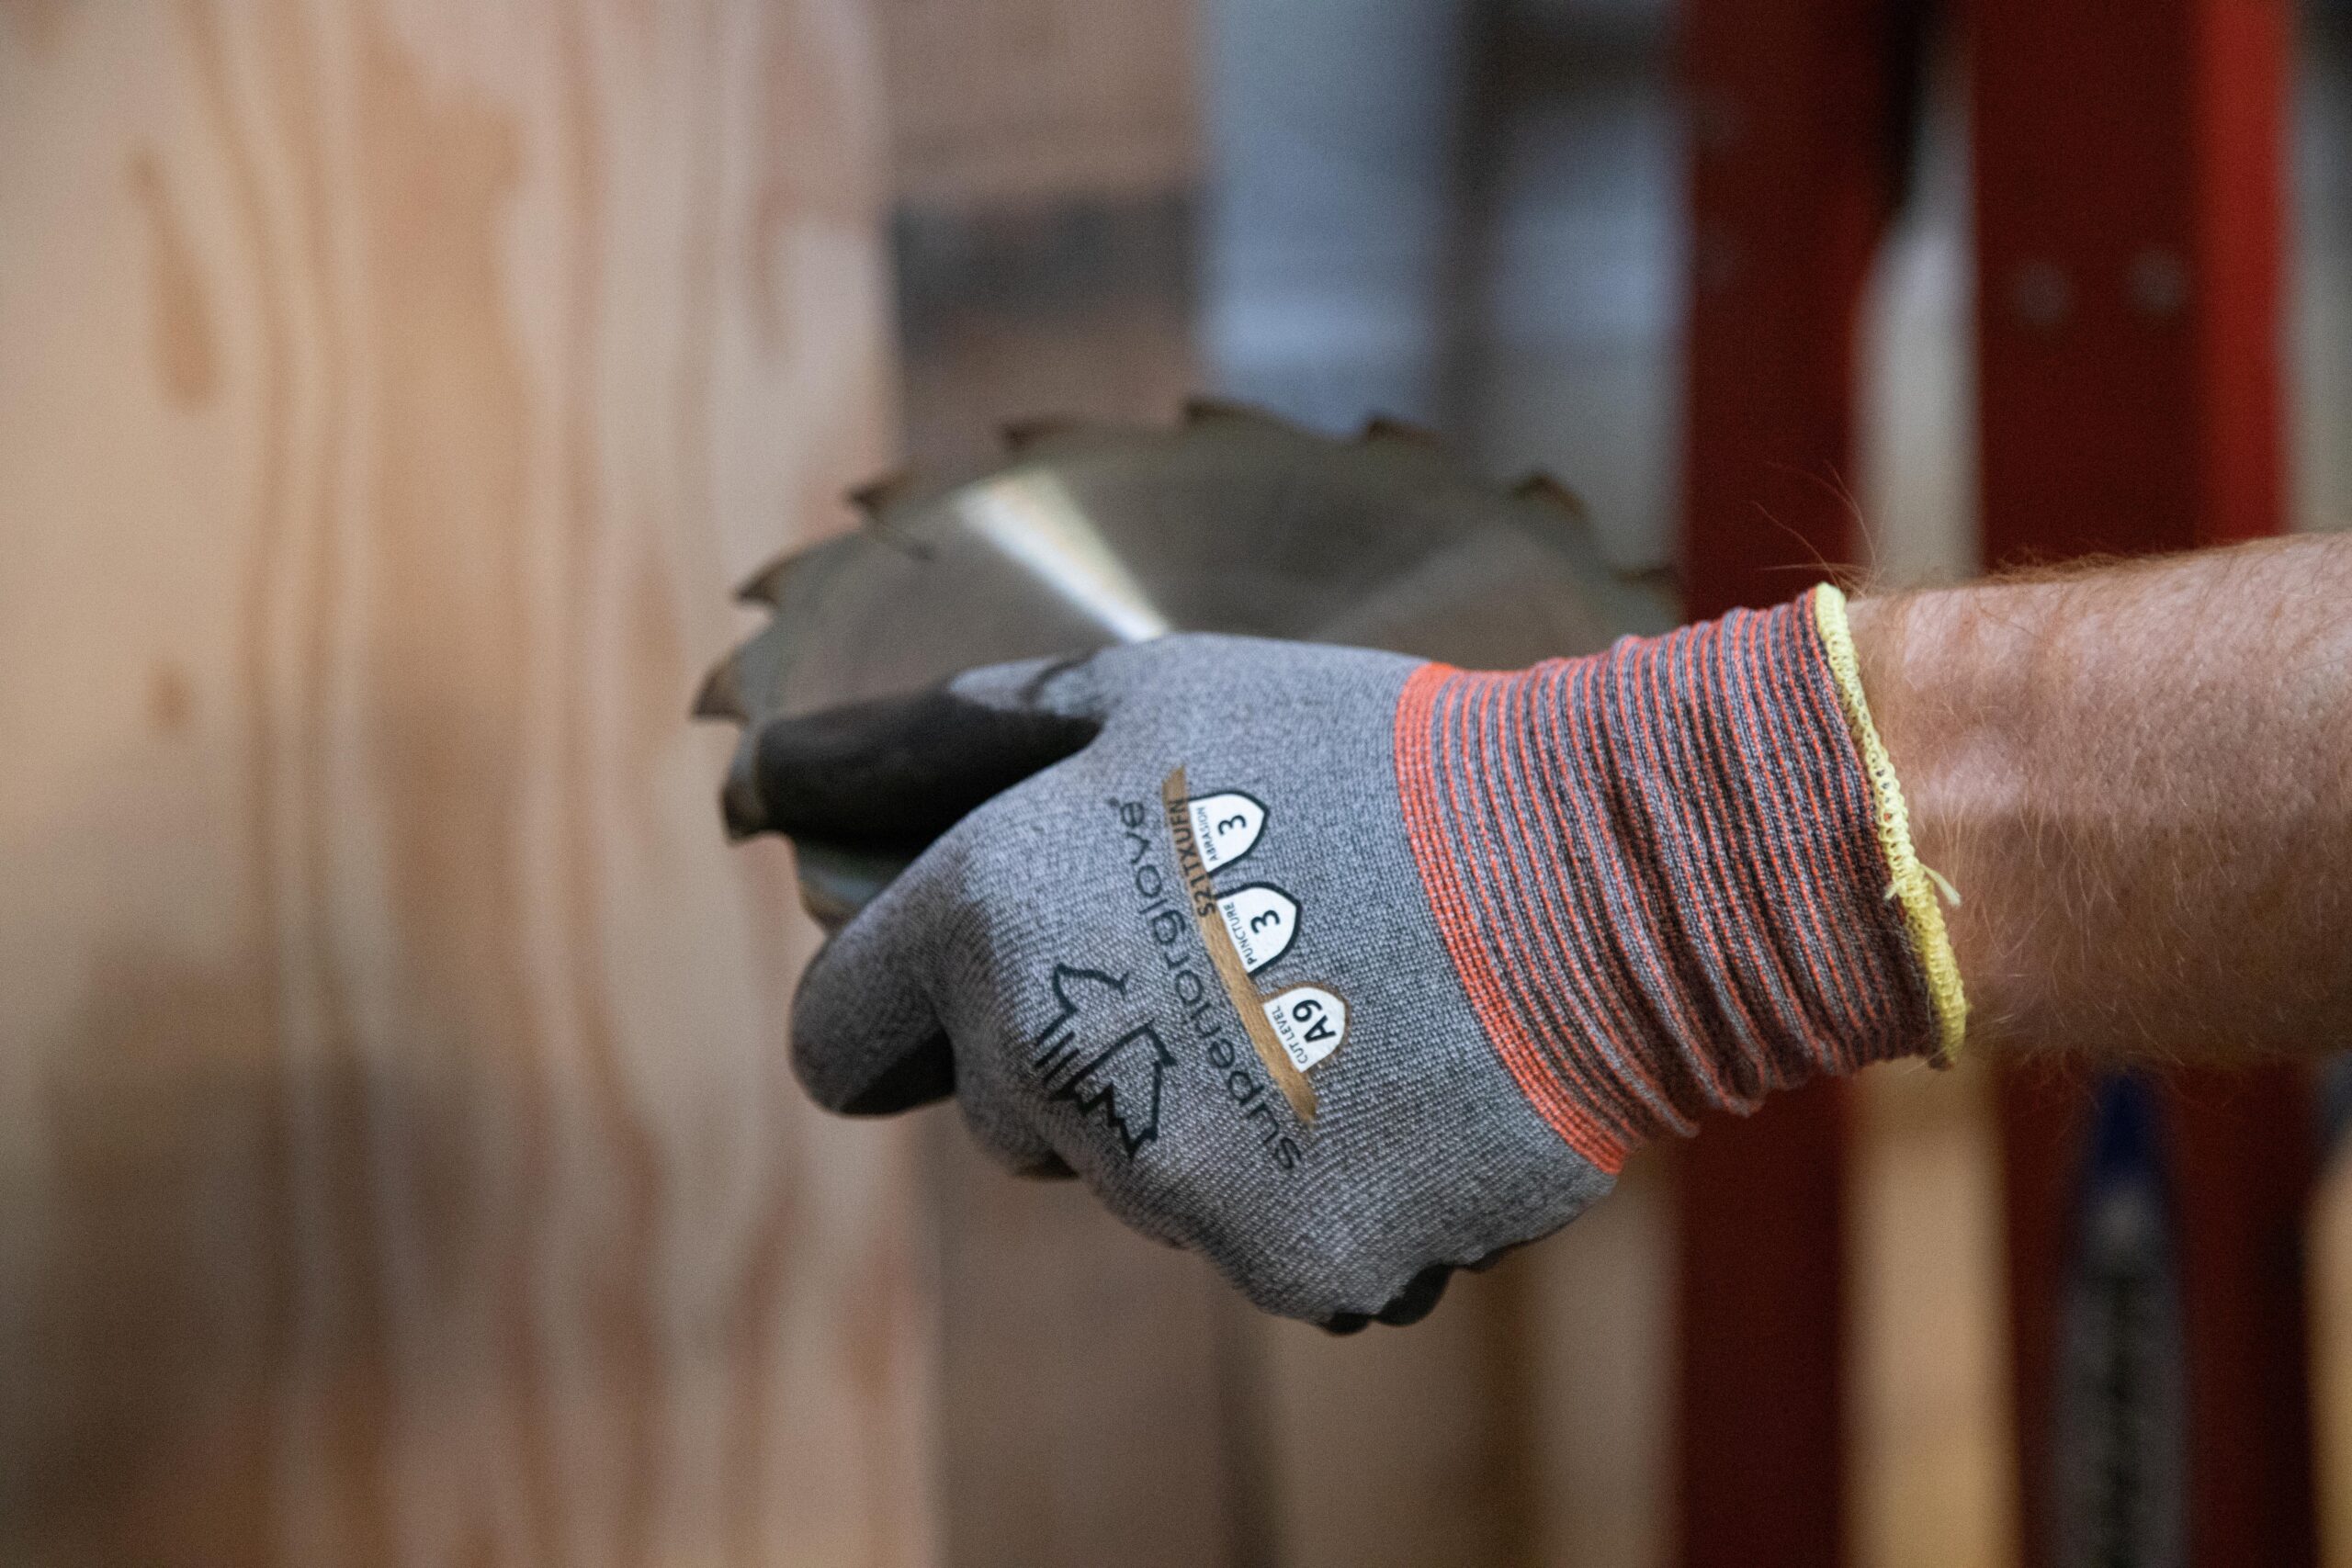 How to choose cut-resistant gloves - Wood Business